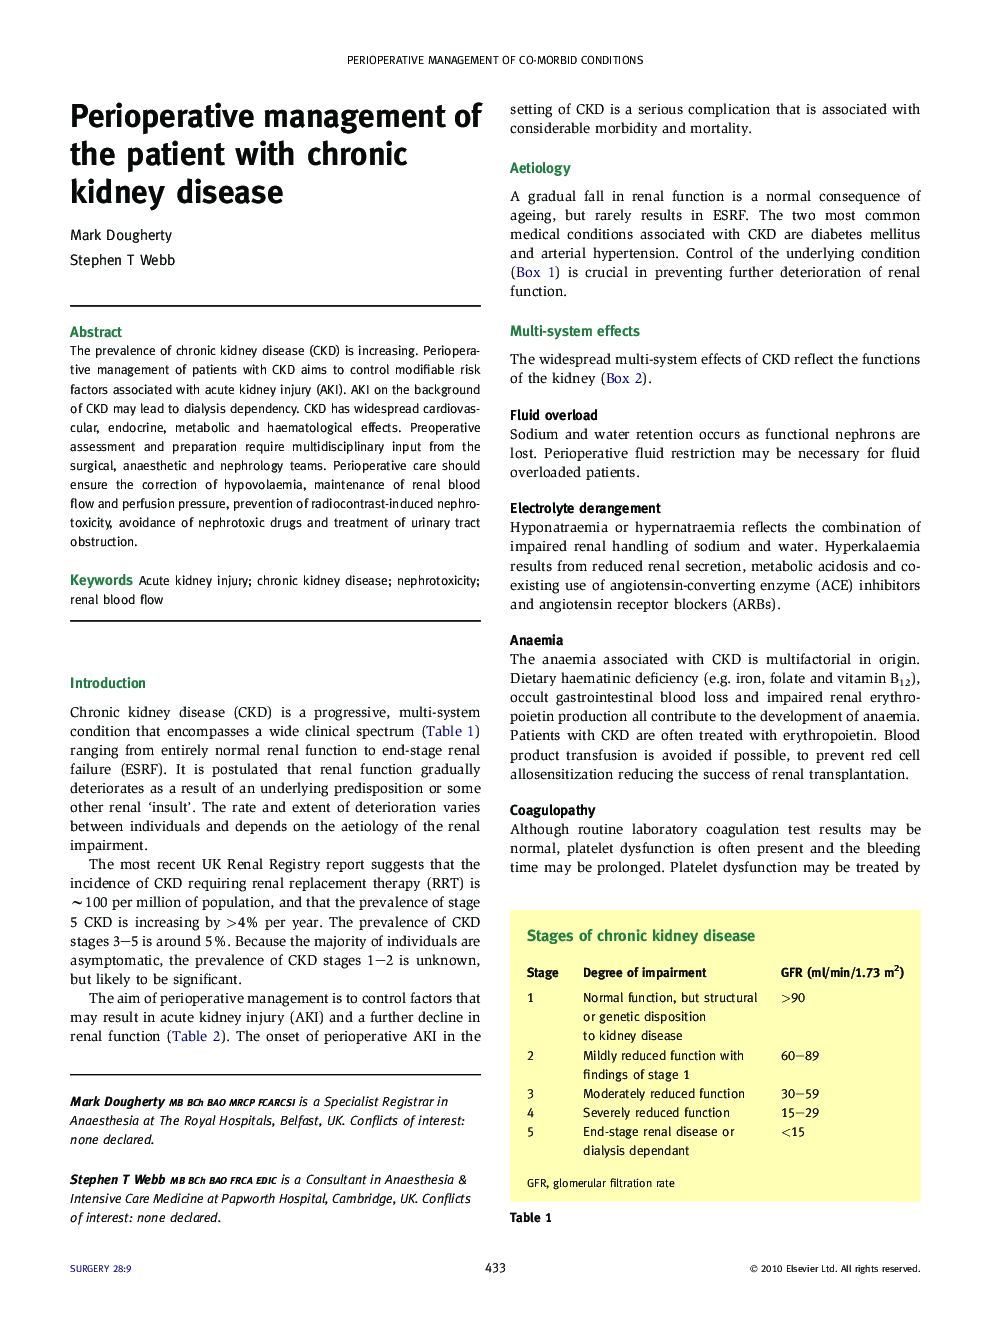 Perioperative management of the patient with chronic kidney disease